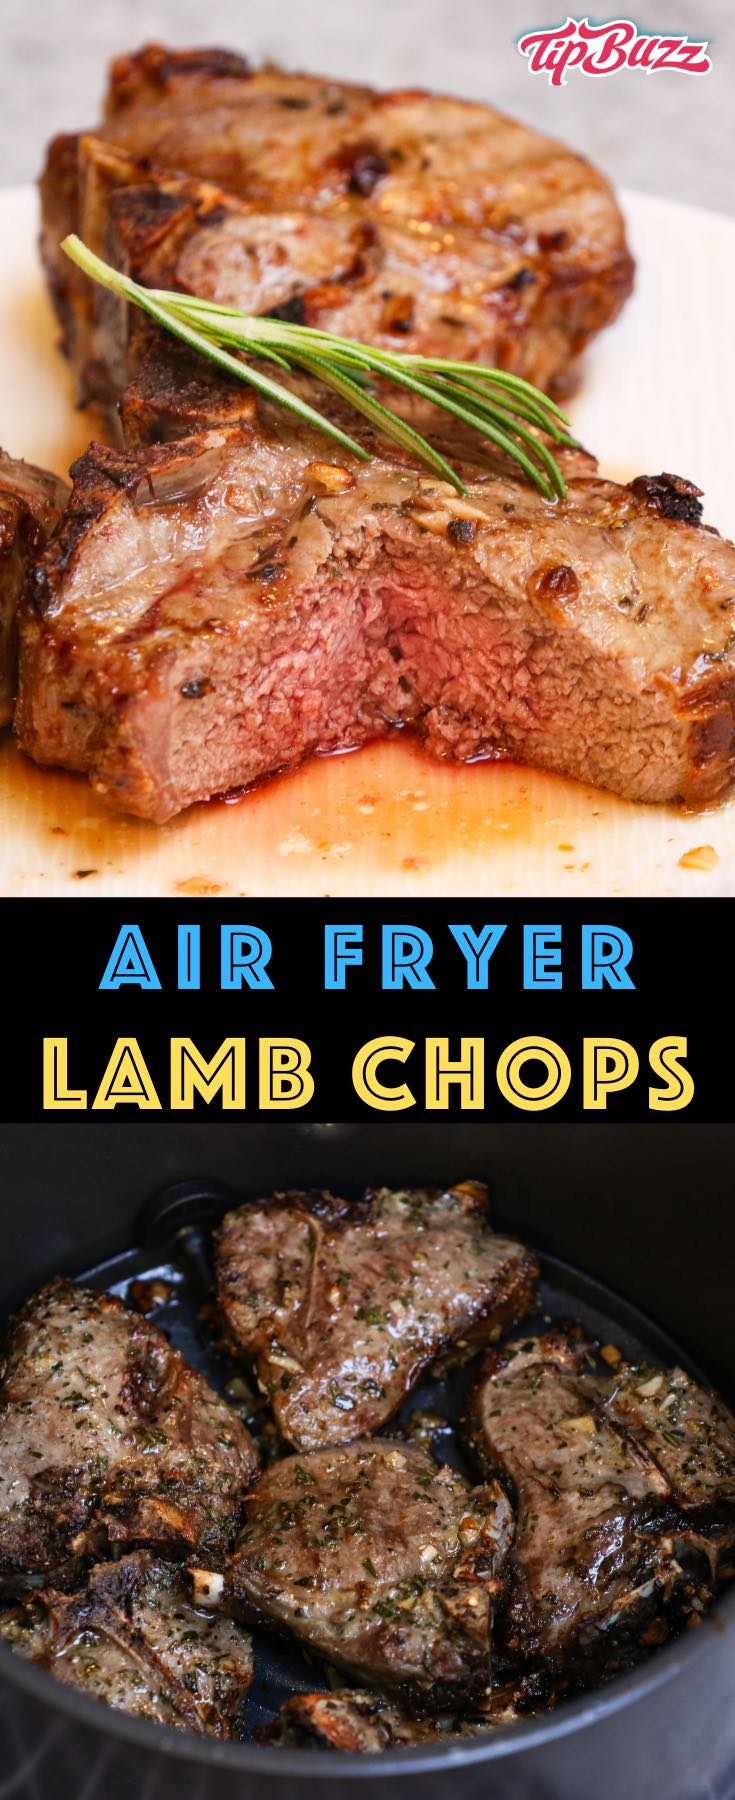 These Air Fryer Lamb Chops are juicy and flavorful with a crispy crust. This easy recipe is the fastest way to cook lamb chops, cutlets or a rack of lamb. They marinate briefly in garlic, rosemary and olive oil before cooking for just 10-12 minutes at 400°F! #AirFryerLambChops